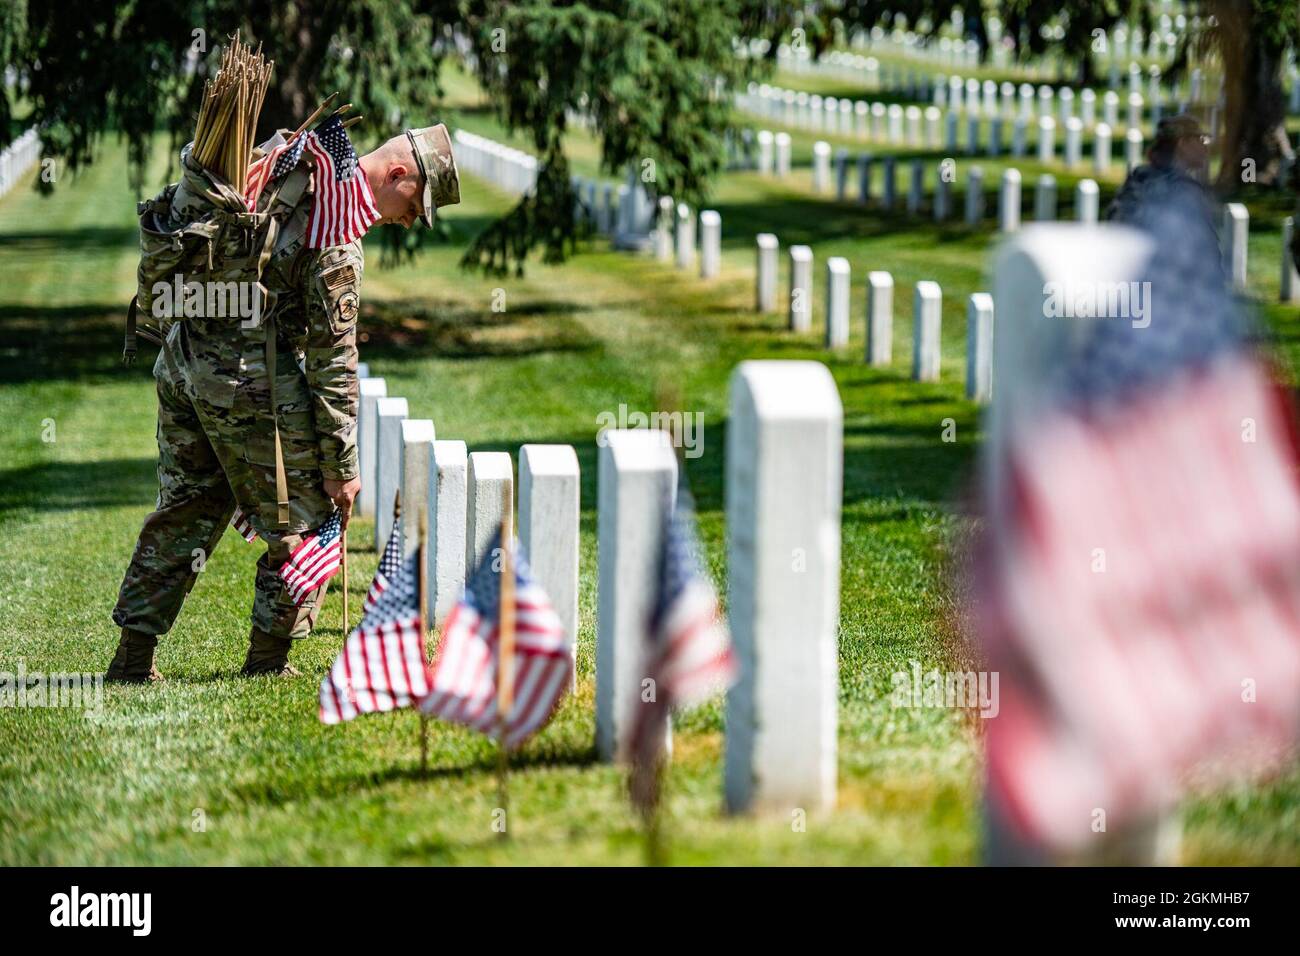 An airman assists in placing over 265,000 U.S. flags at every gravesite, columbarium court column, and niche wall column as part of Flags-In at Arlington National Cemetery, Arlington, Virginia, May 27, 2021.    For more than 50 years, soldiers from The Old Guard have honored our nation’s fallen military heroes by placing U.S. flags at the gravesites of service members buried at both Arlington National Cemetery and the U.S. Soldiers’ and Airmen’s Home National Cemetery just prior to the Memorial Day weekend. For the first time in 20 years, members from the U.S. Marine Corps, the U.S. Navy, the Stock Photo